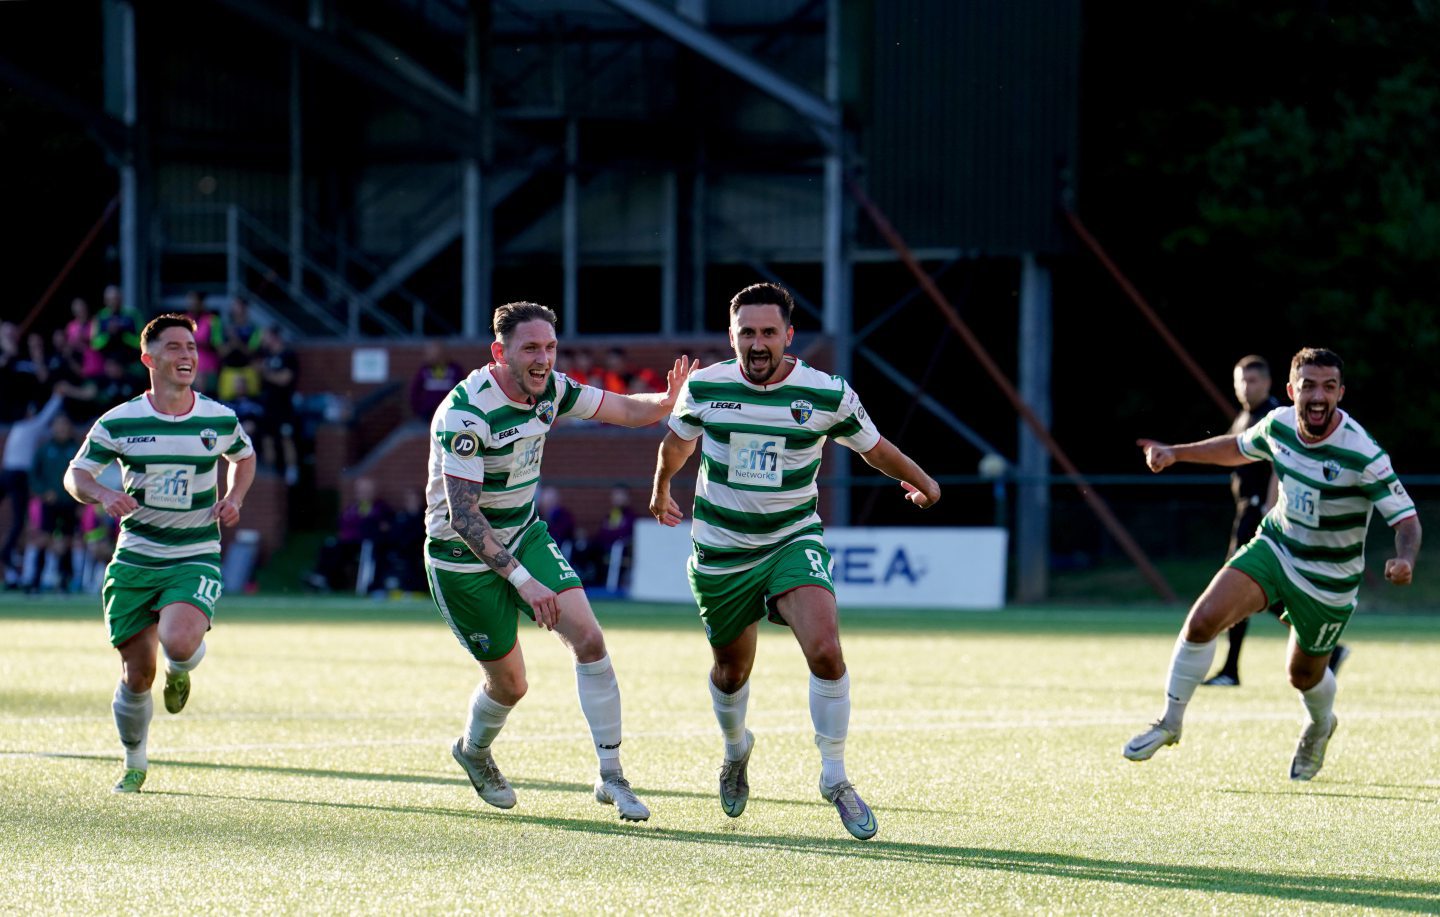 The New Saints's Ryan Brobbel celebrates scoring the opening goal during the UEFA Champions League first qualifying round, first leg match at Park Hall, 